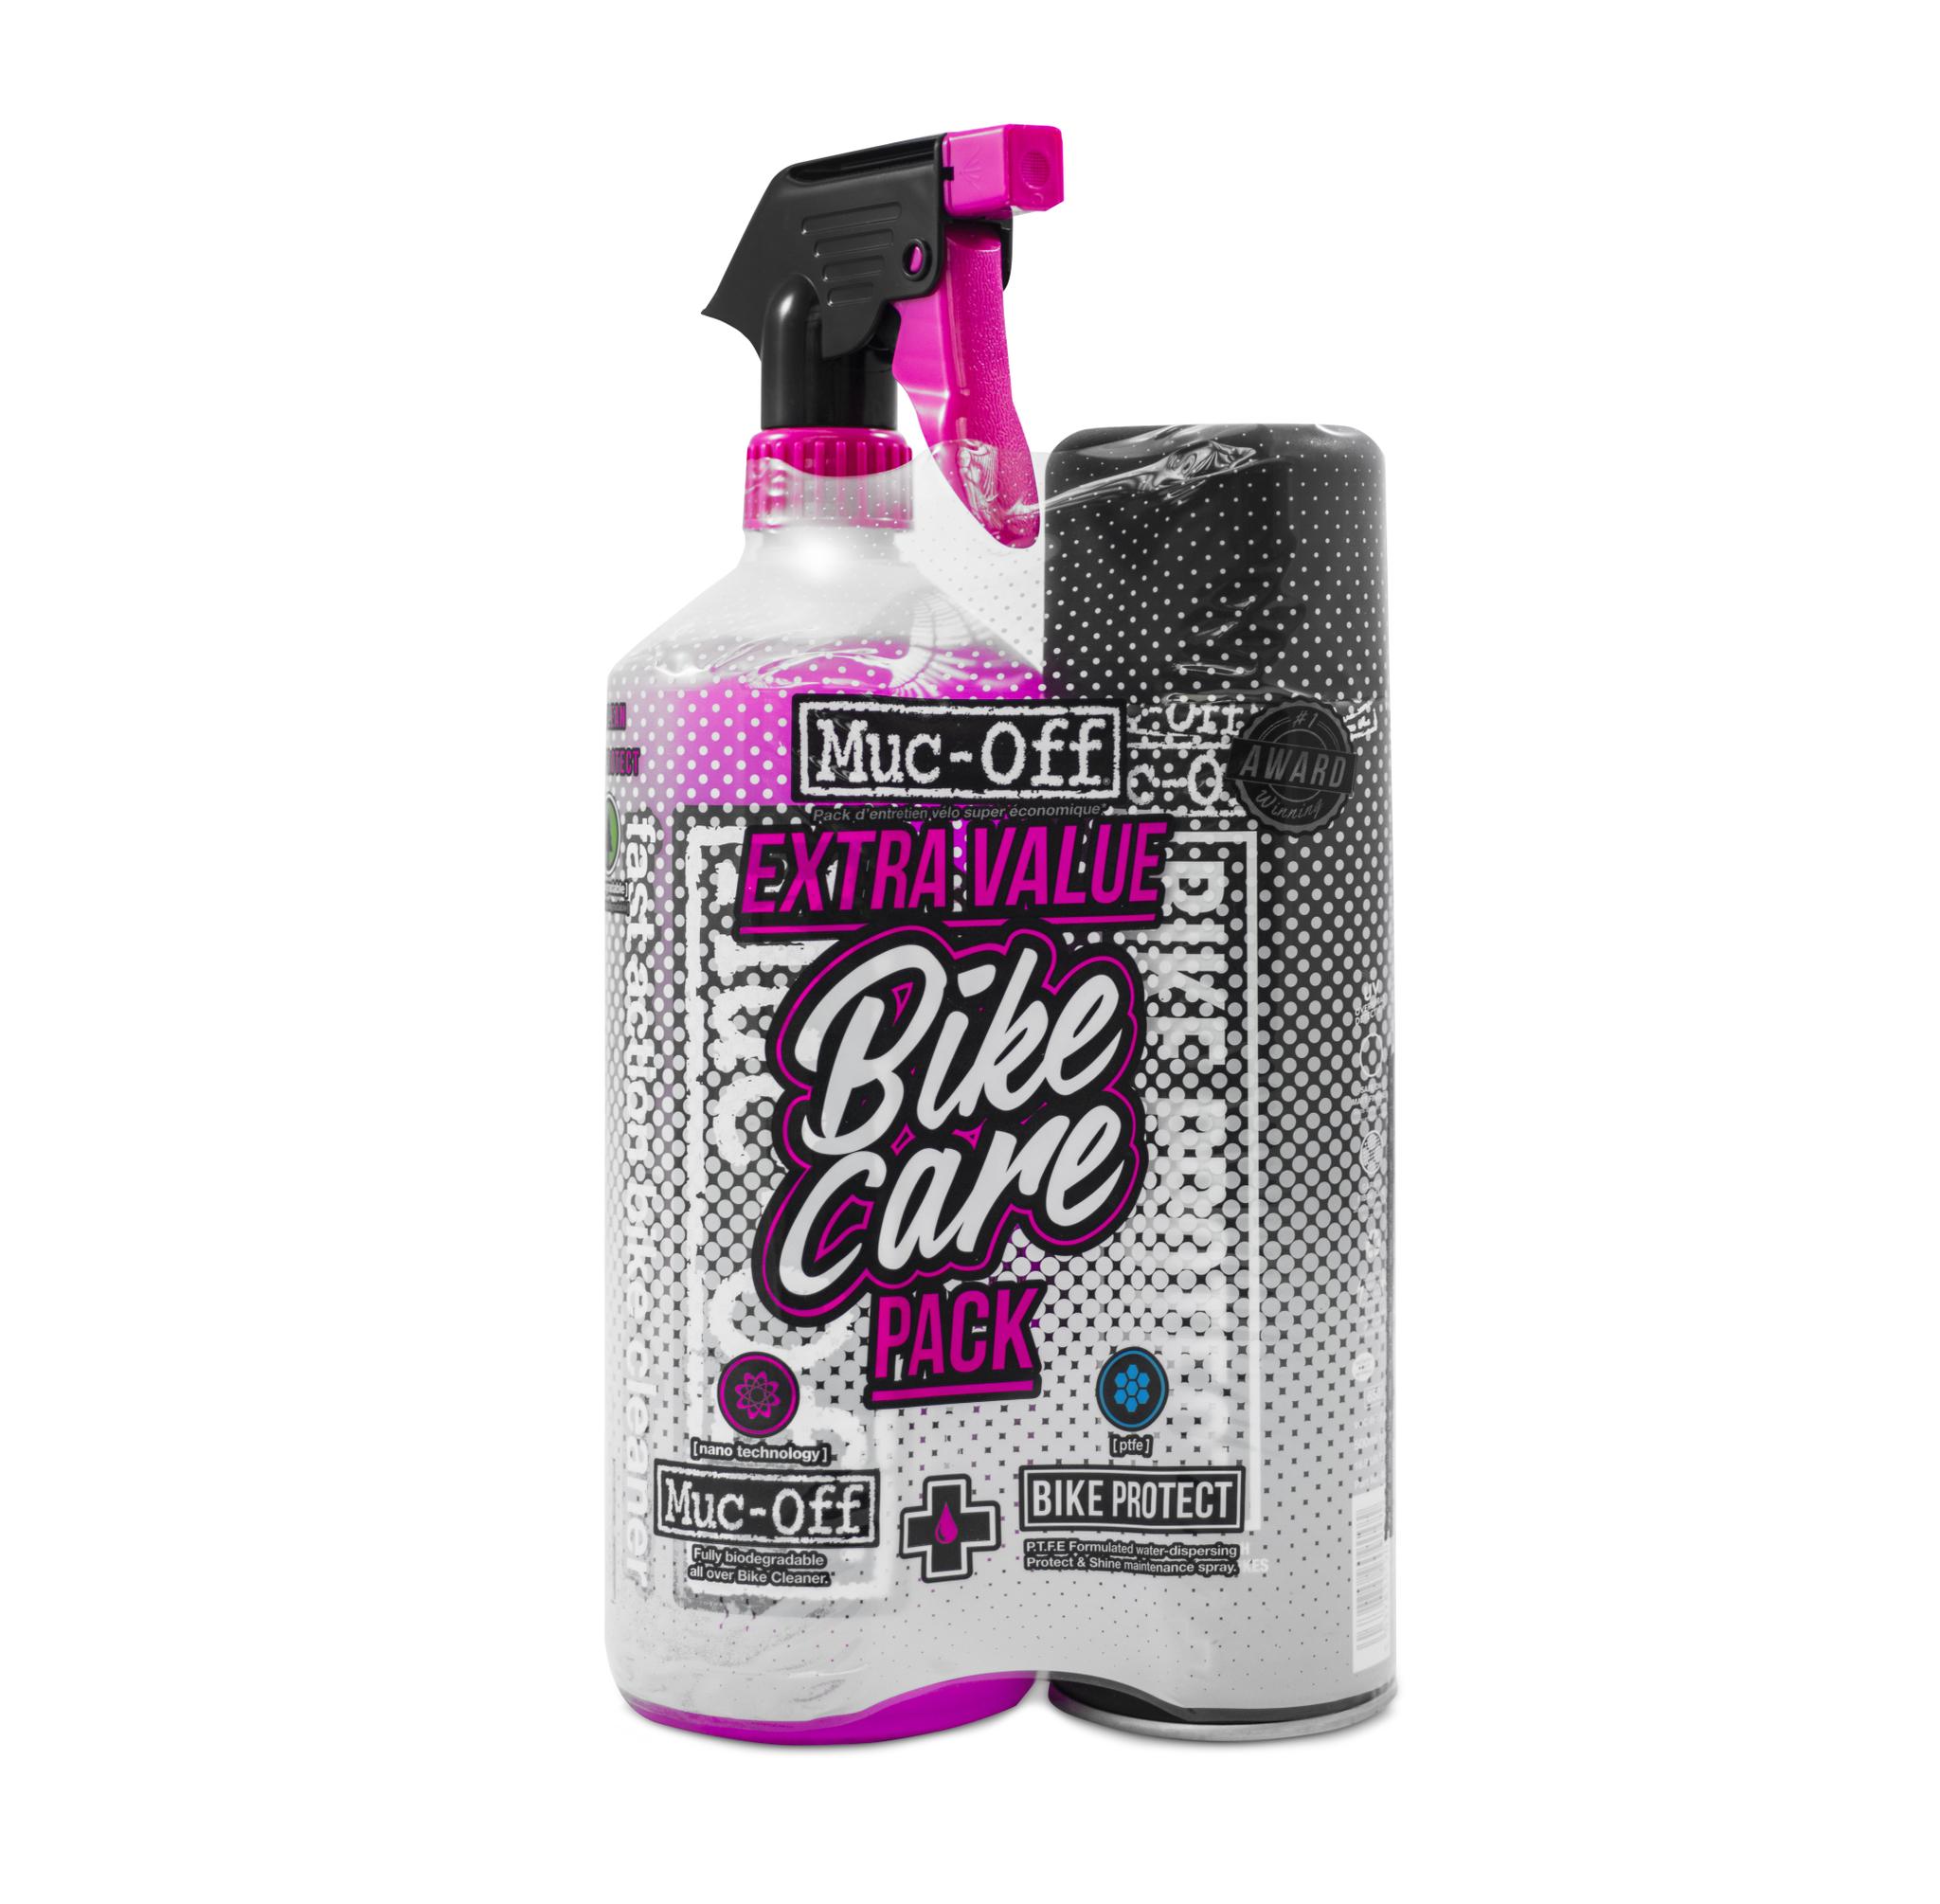 Muc-off Duo Pack Xtra Value Bike Care Pack - Pink/transparent